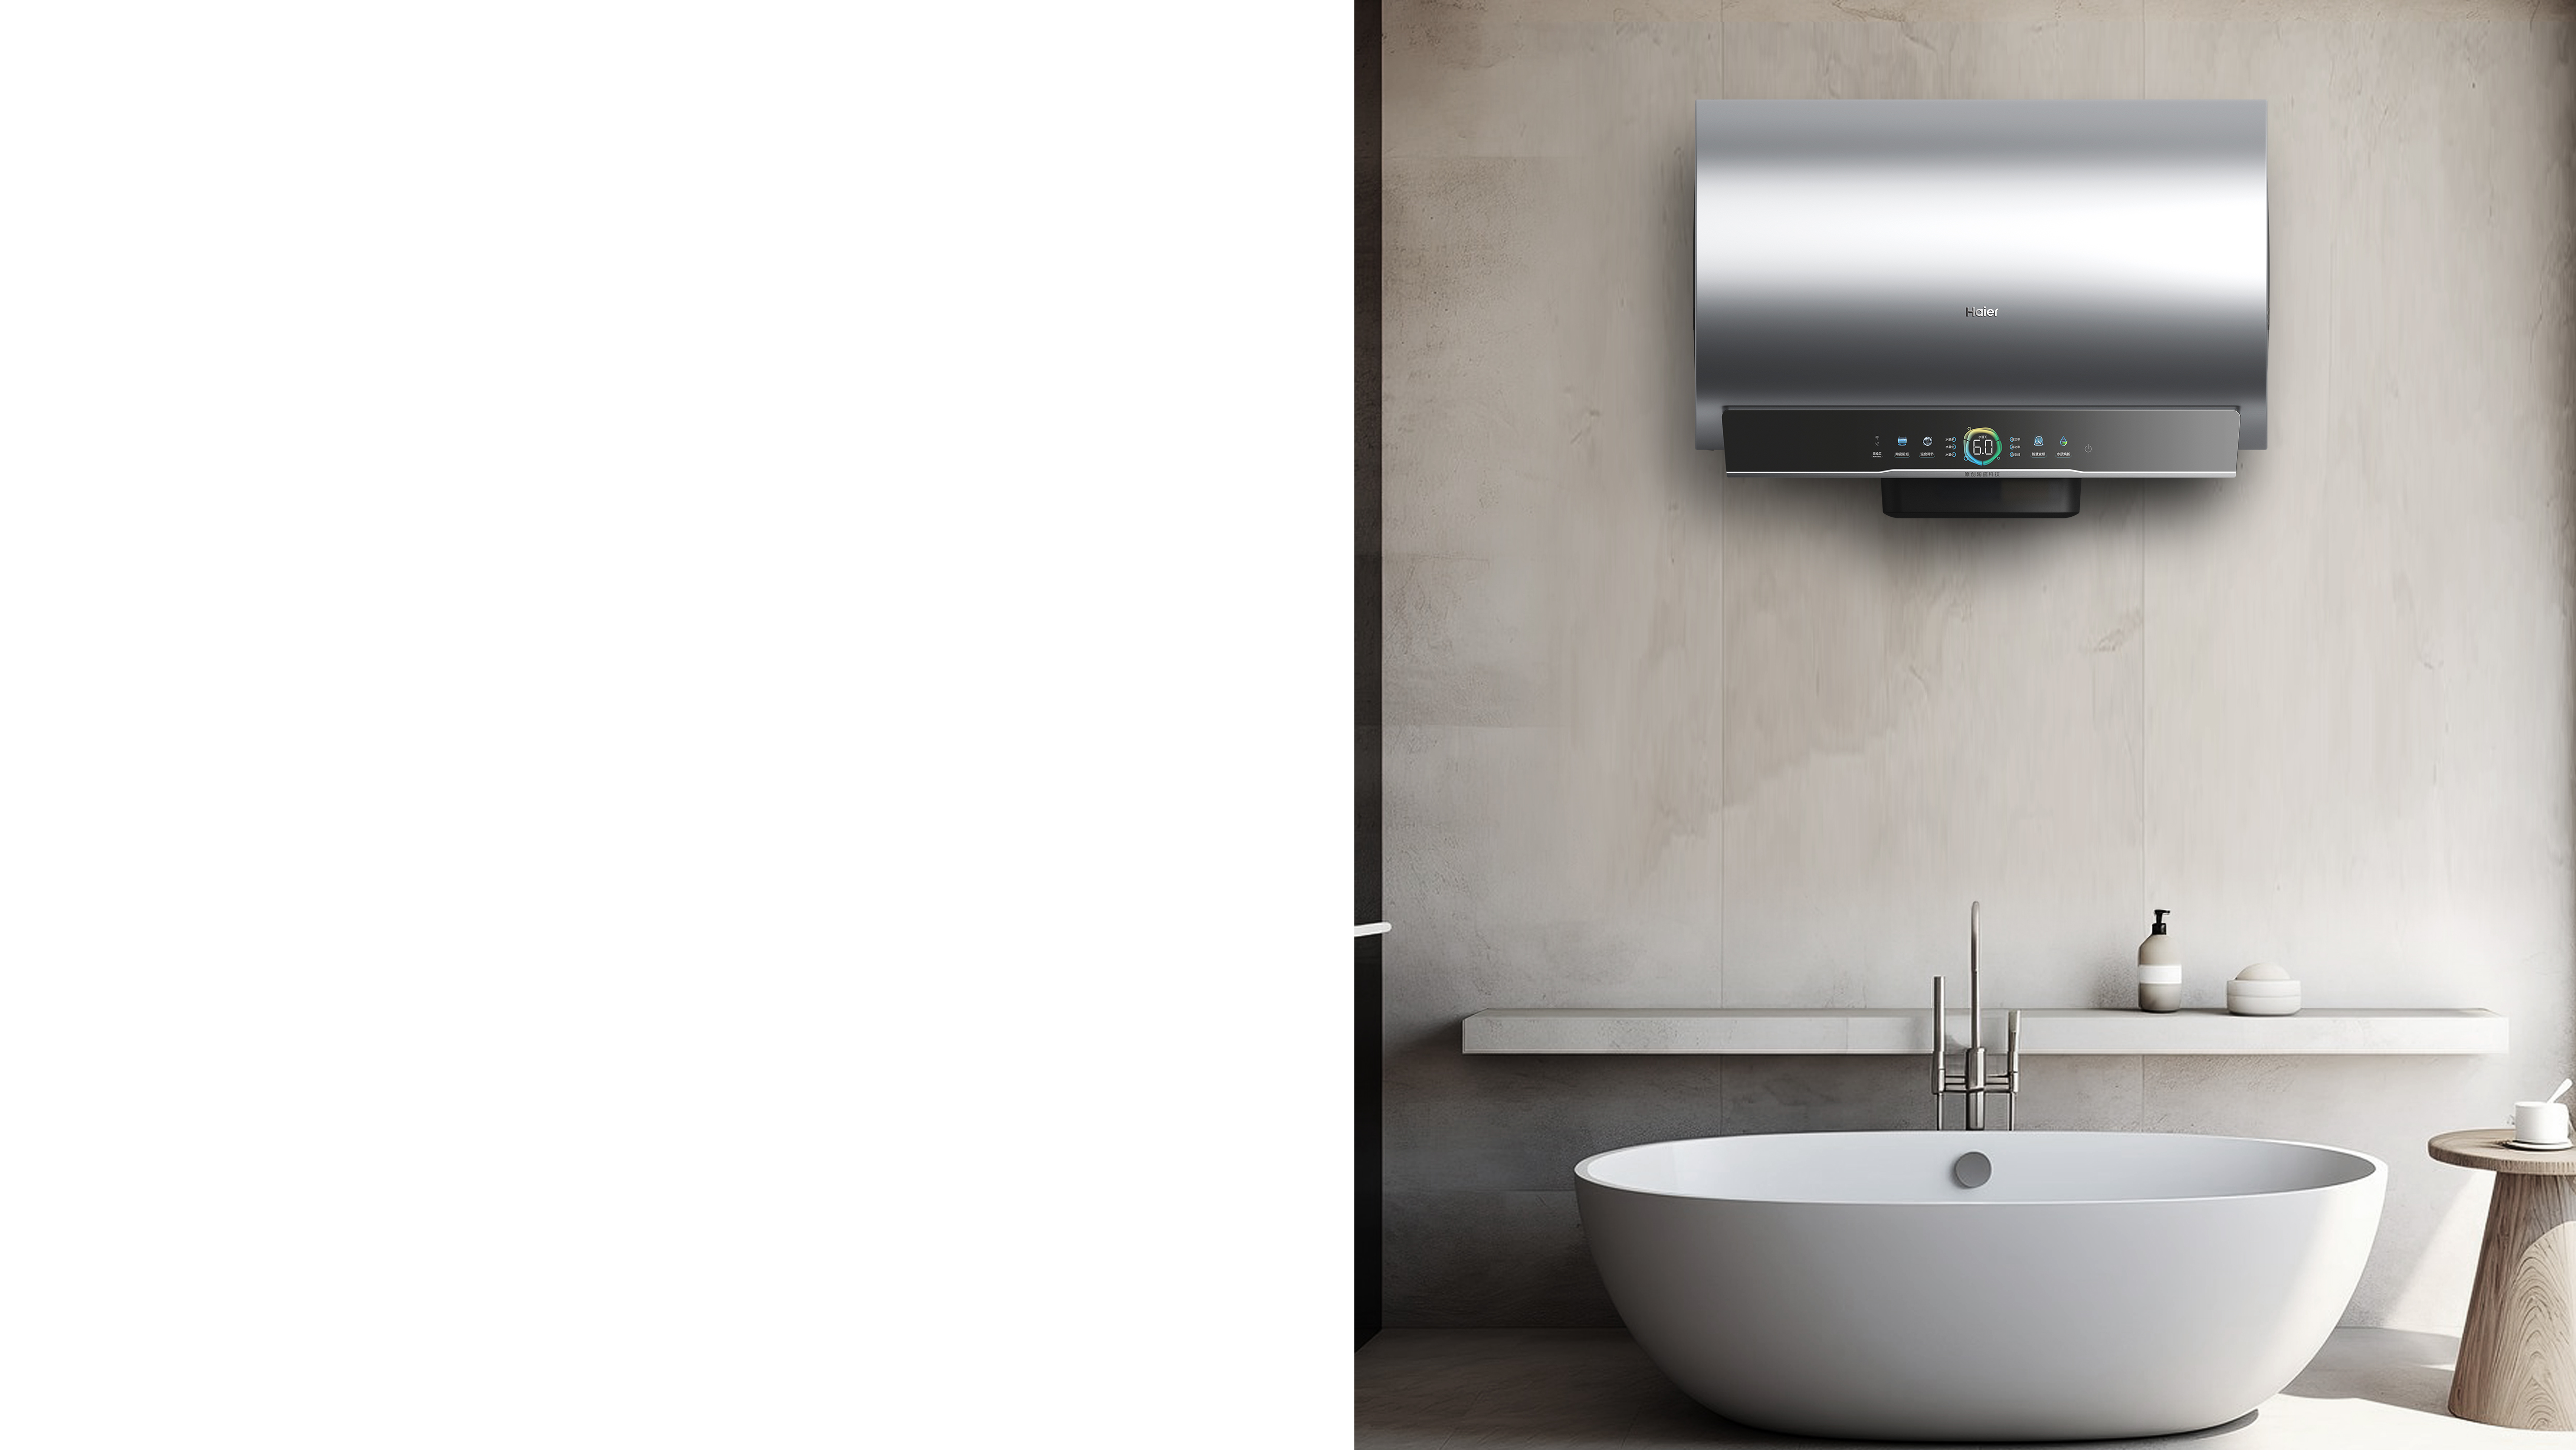 Haier electric water heater